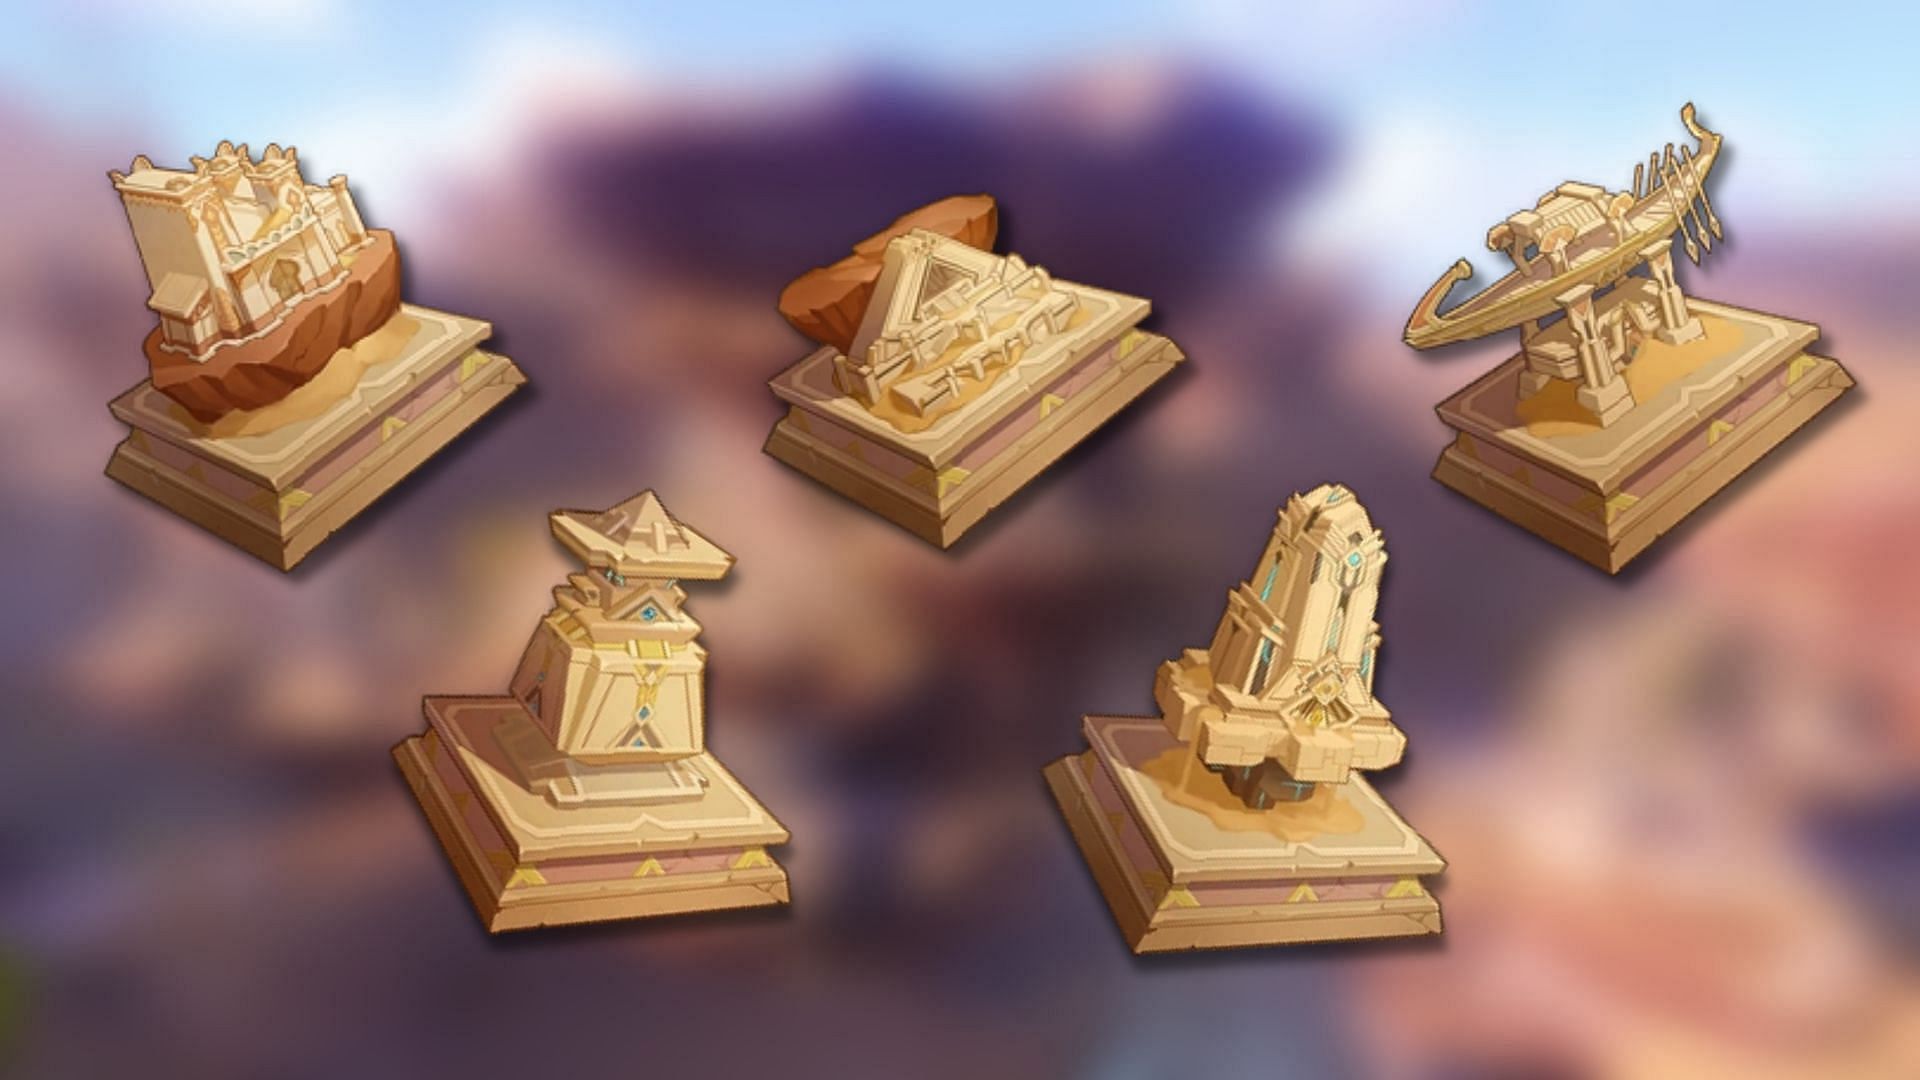 All 7 Chess Pieces Activation & Apocalypse Lost Genshin World Quest 